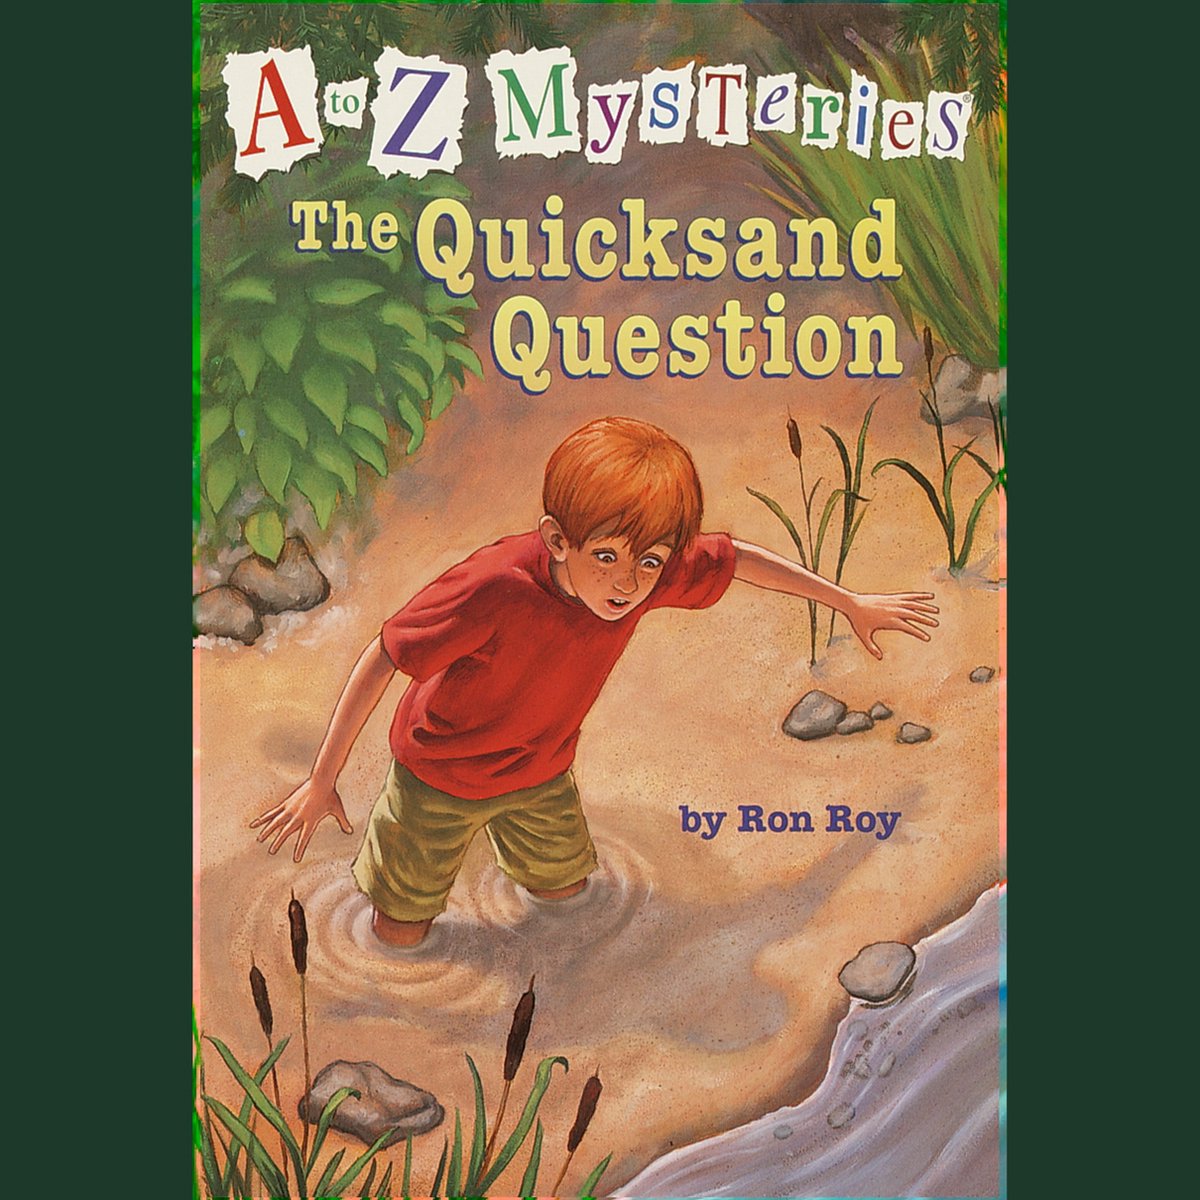 A to Z Mysteries: The Quicksand Question - Ron Roy